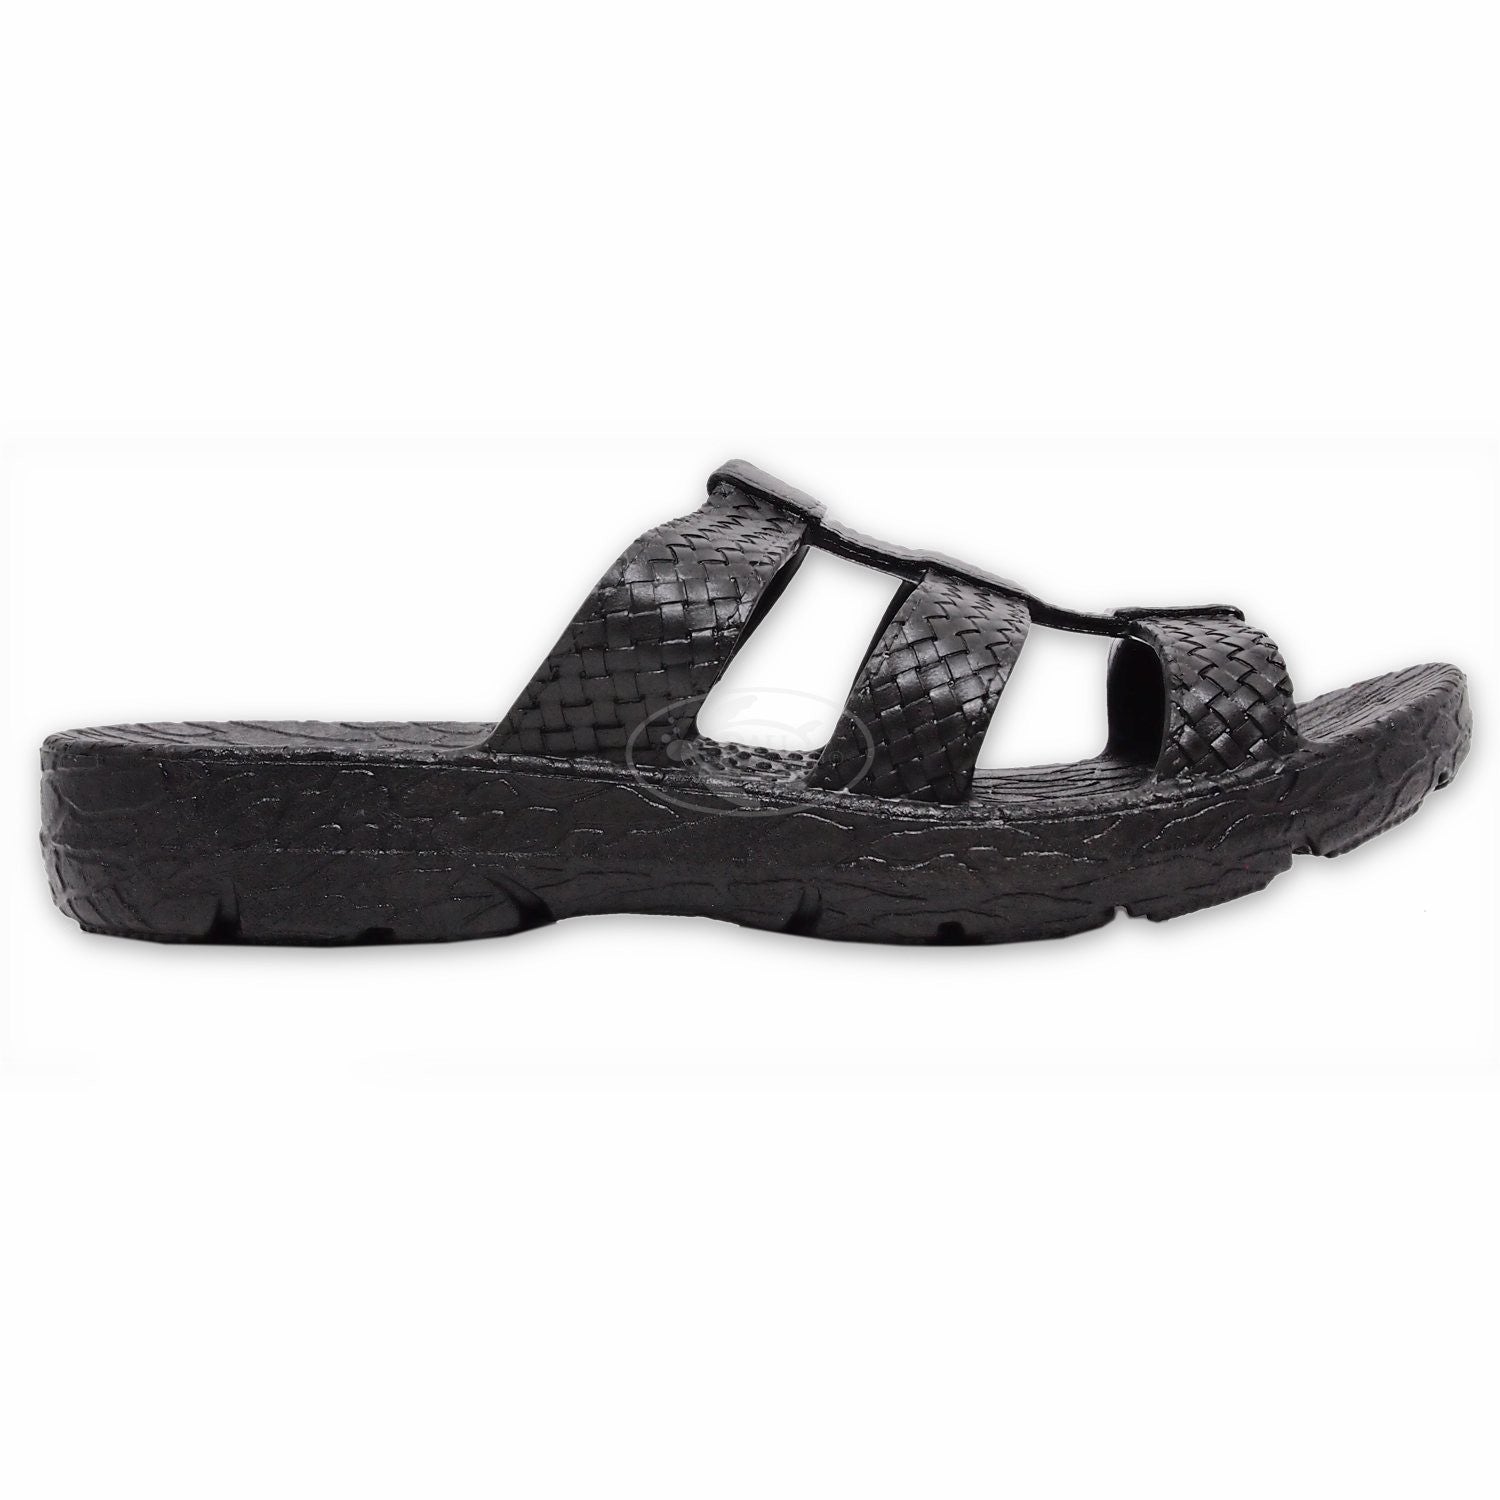 Women's Hipster Black Solid - Pualani Hawaii